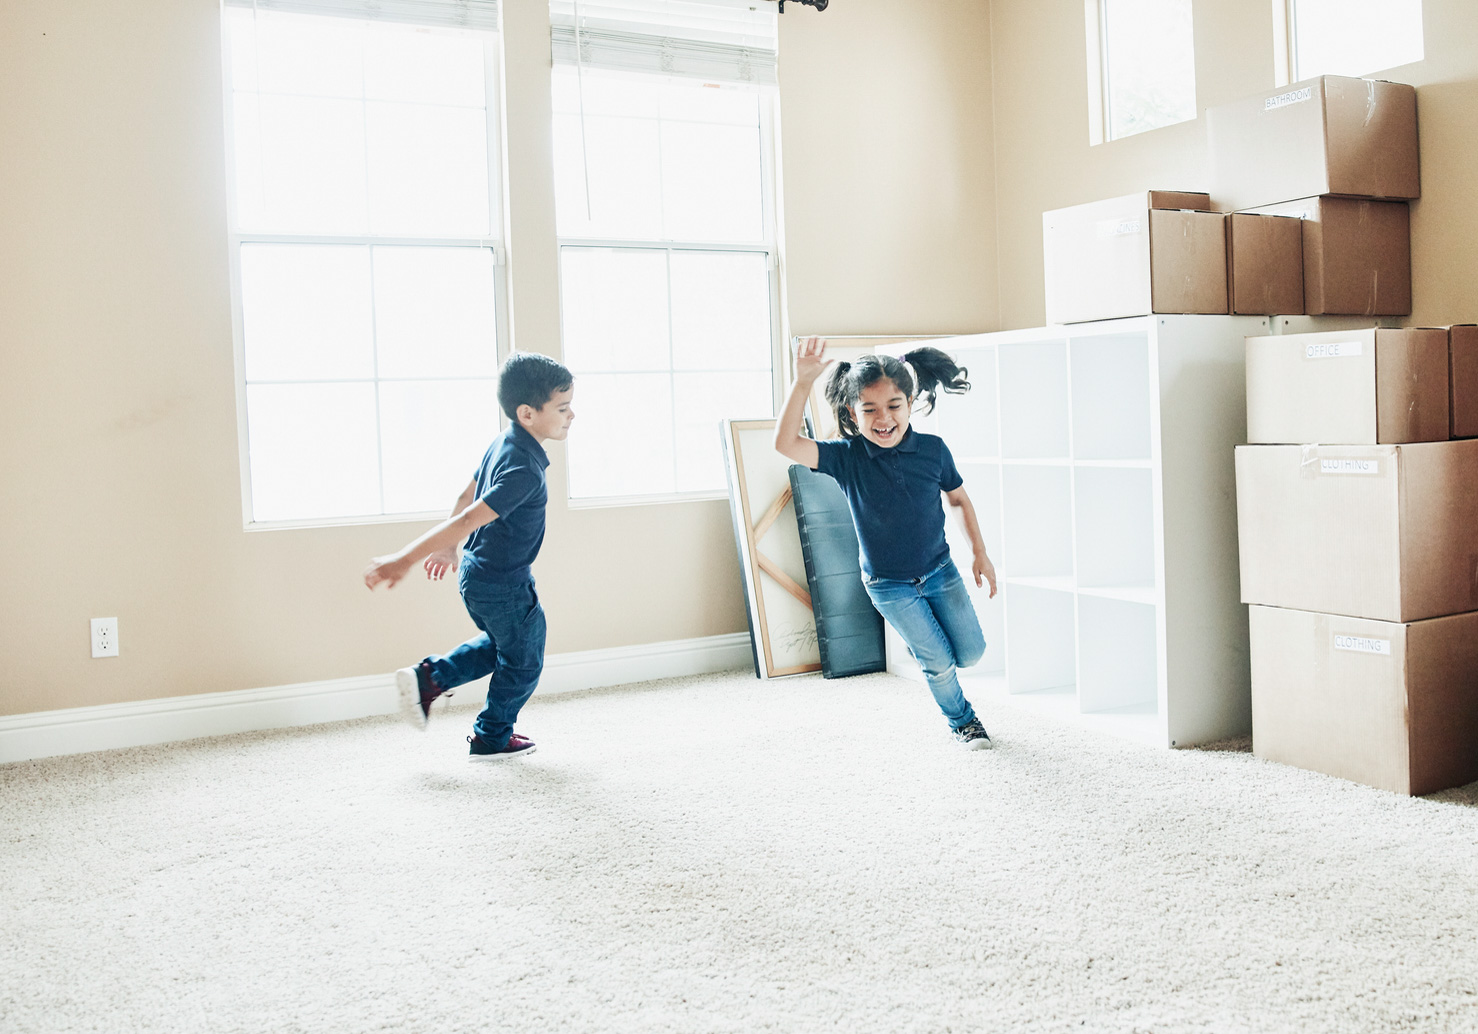 Two young boys chasing each other in a room with moving boxes